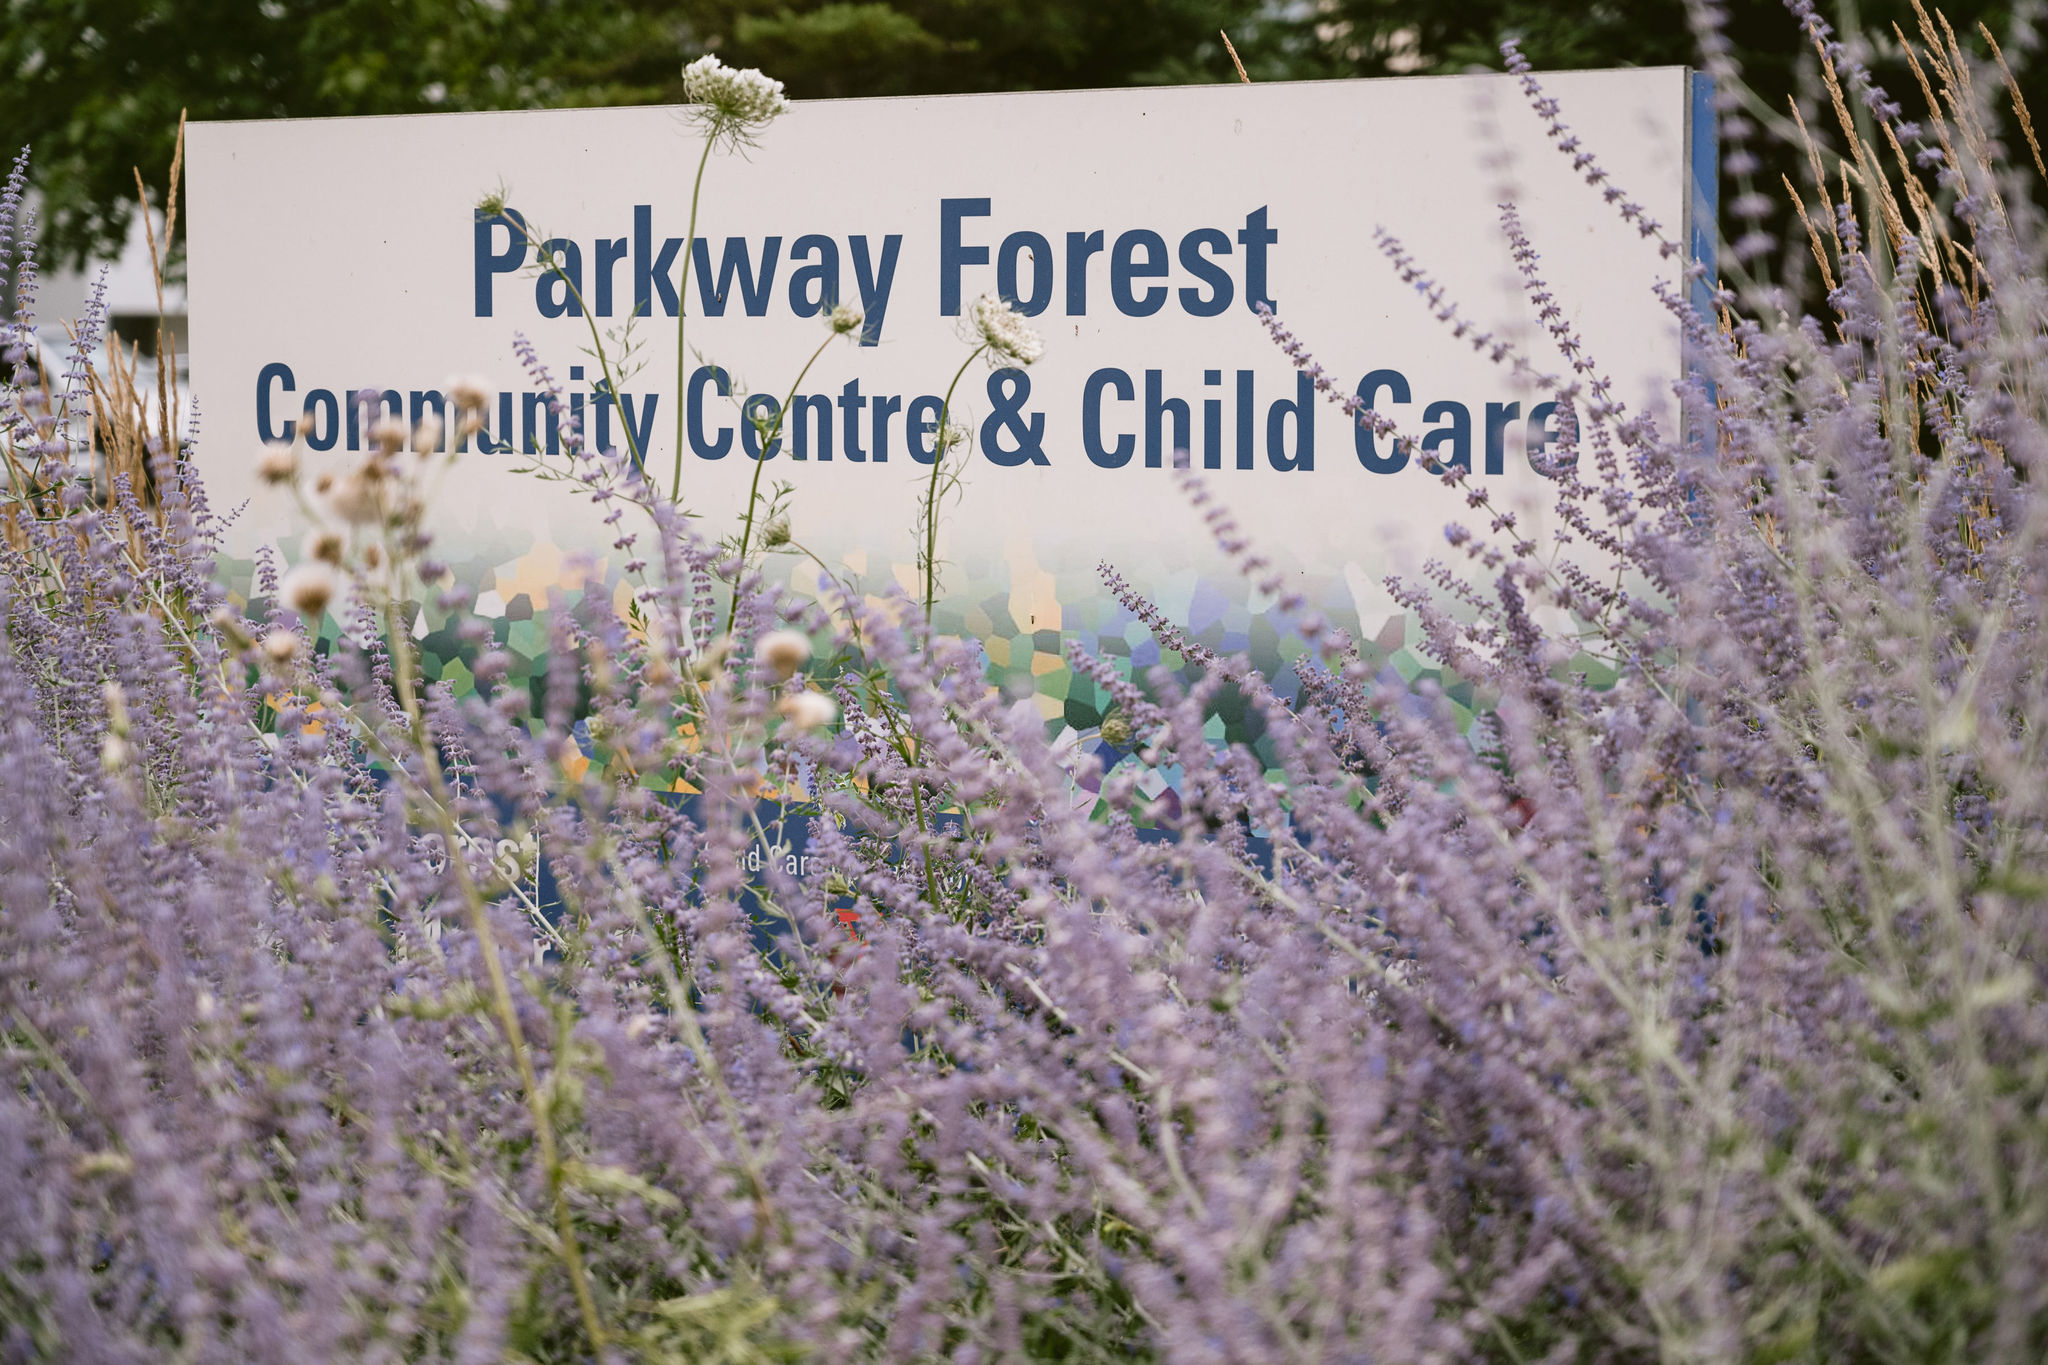 A building sign that says, “Parkway Forest Community Centre & Child Care.”